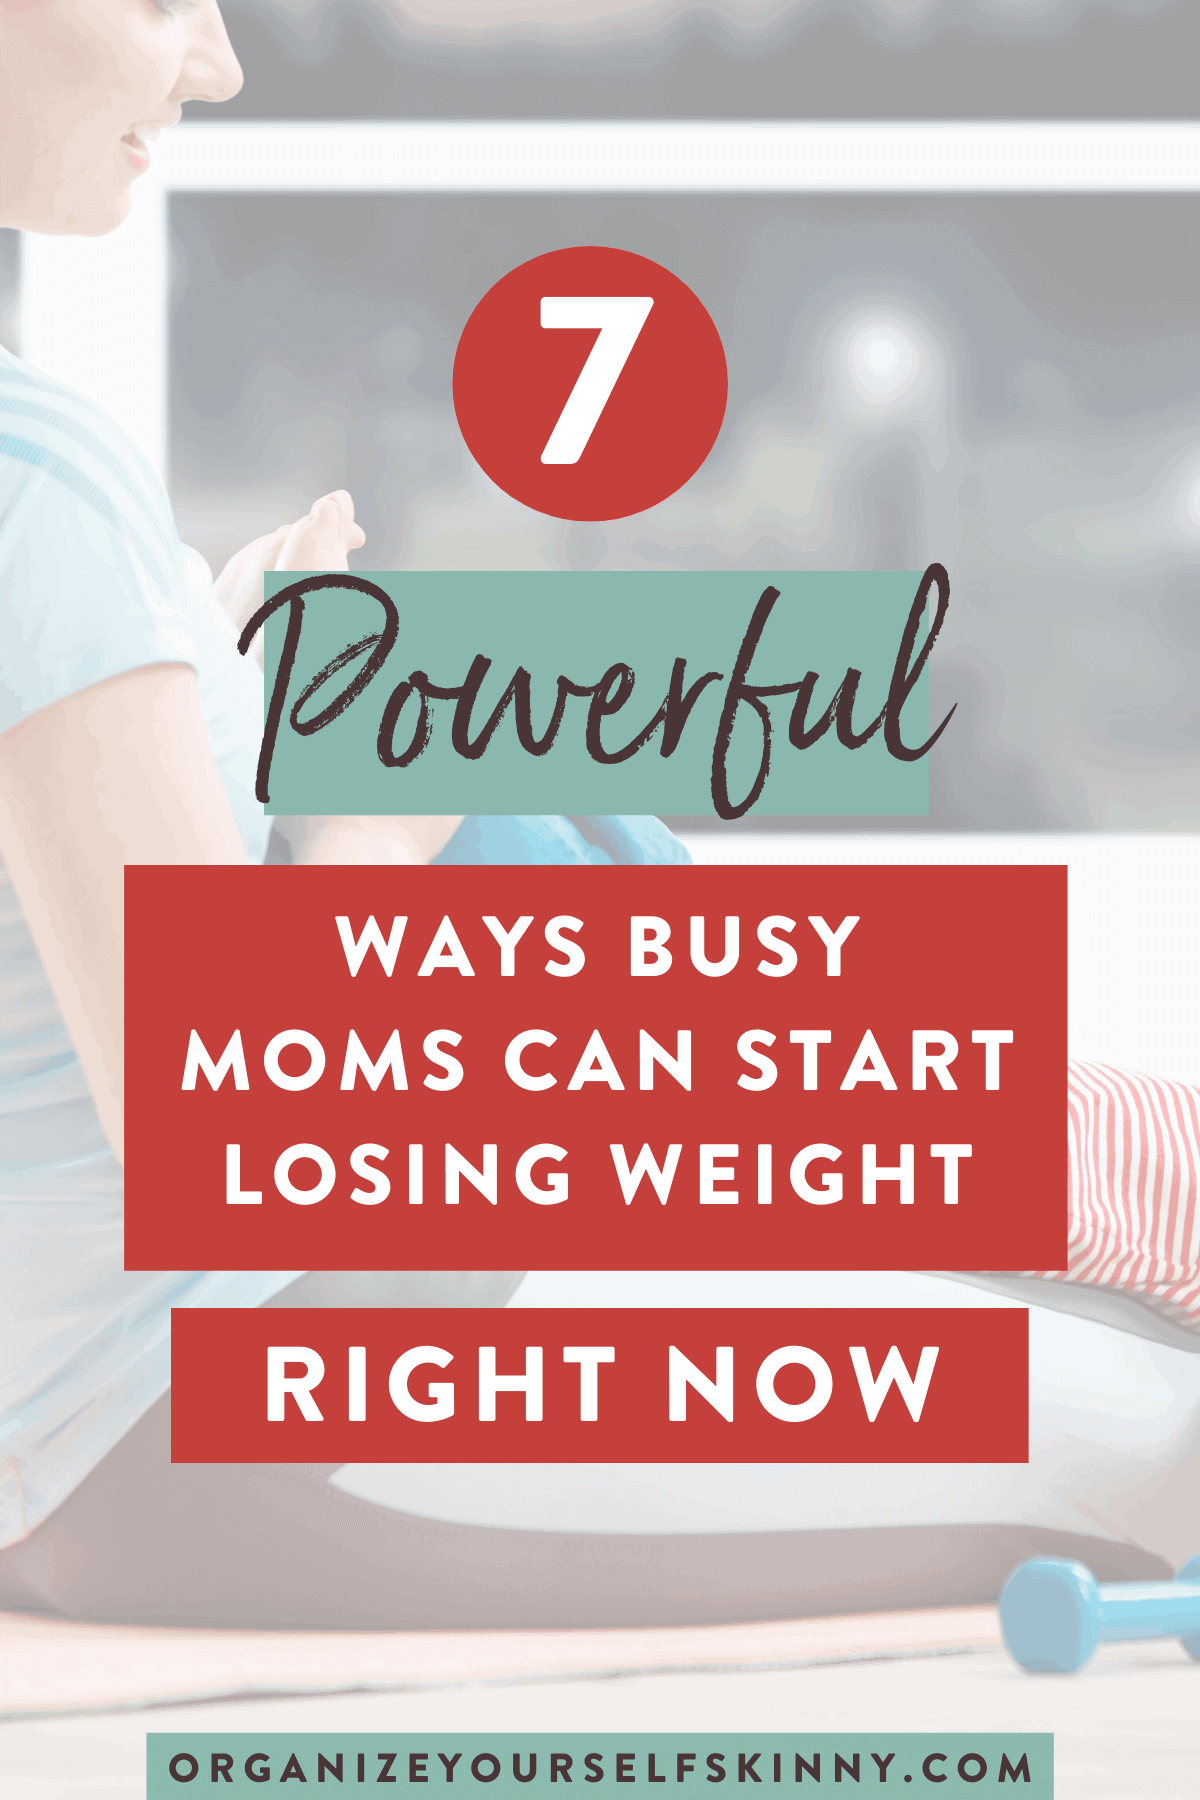 7 Weight Loss Tips for Busy Moms